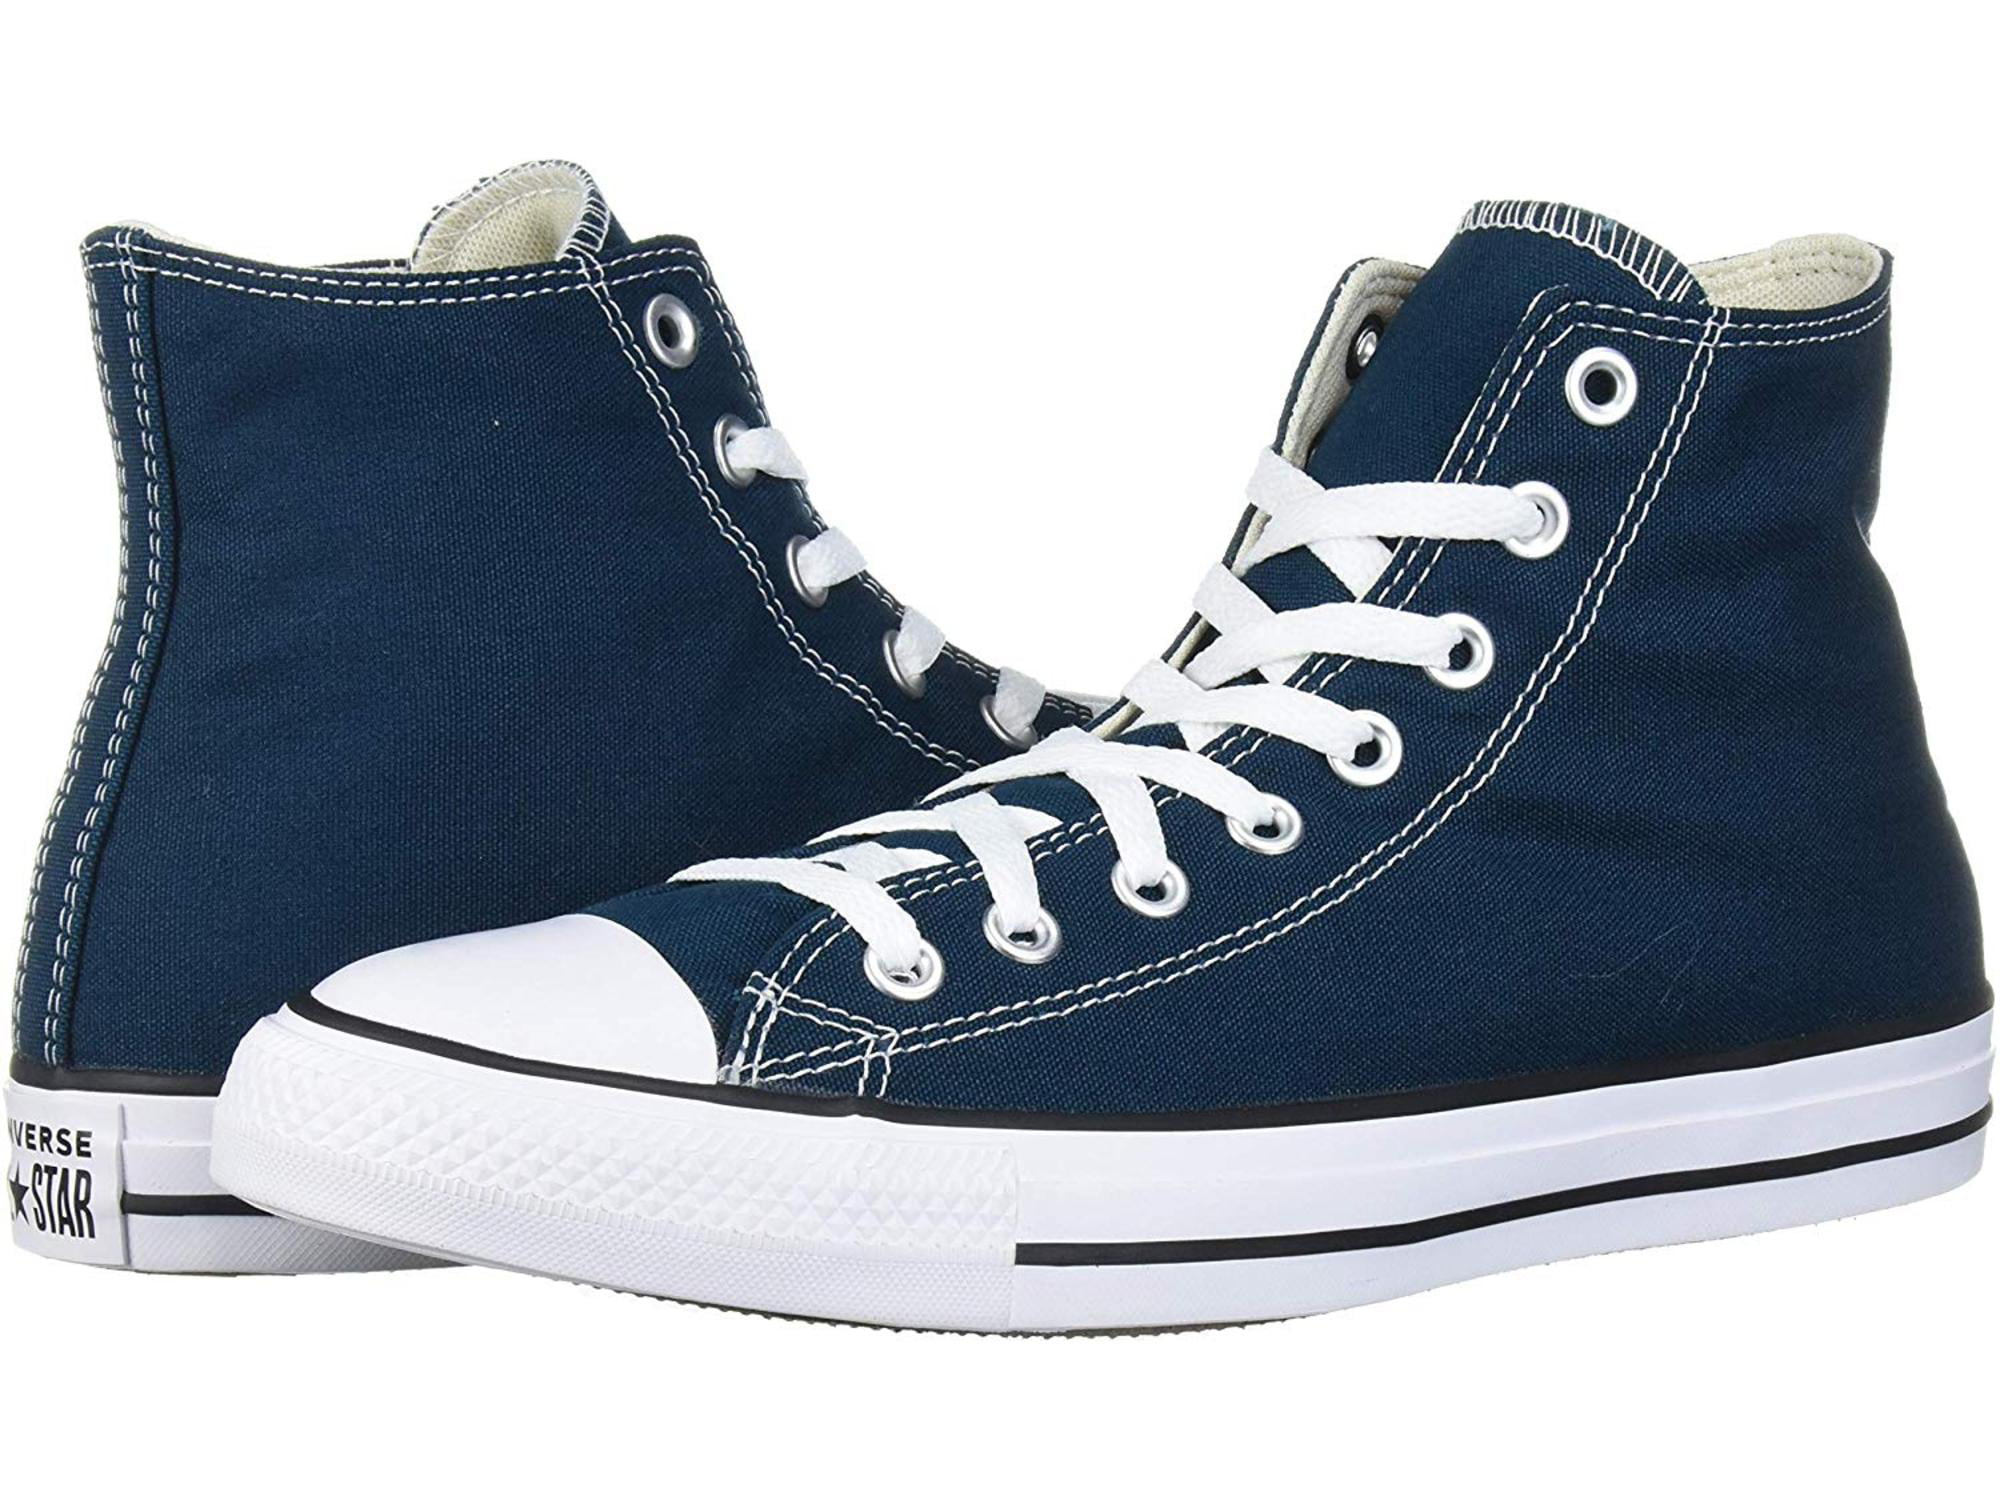 Converse Chuck Taylor All Star 2019 Seasonal, Midnight Turquoise, Size ...